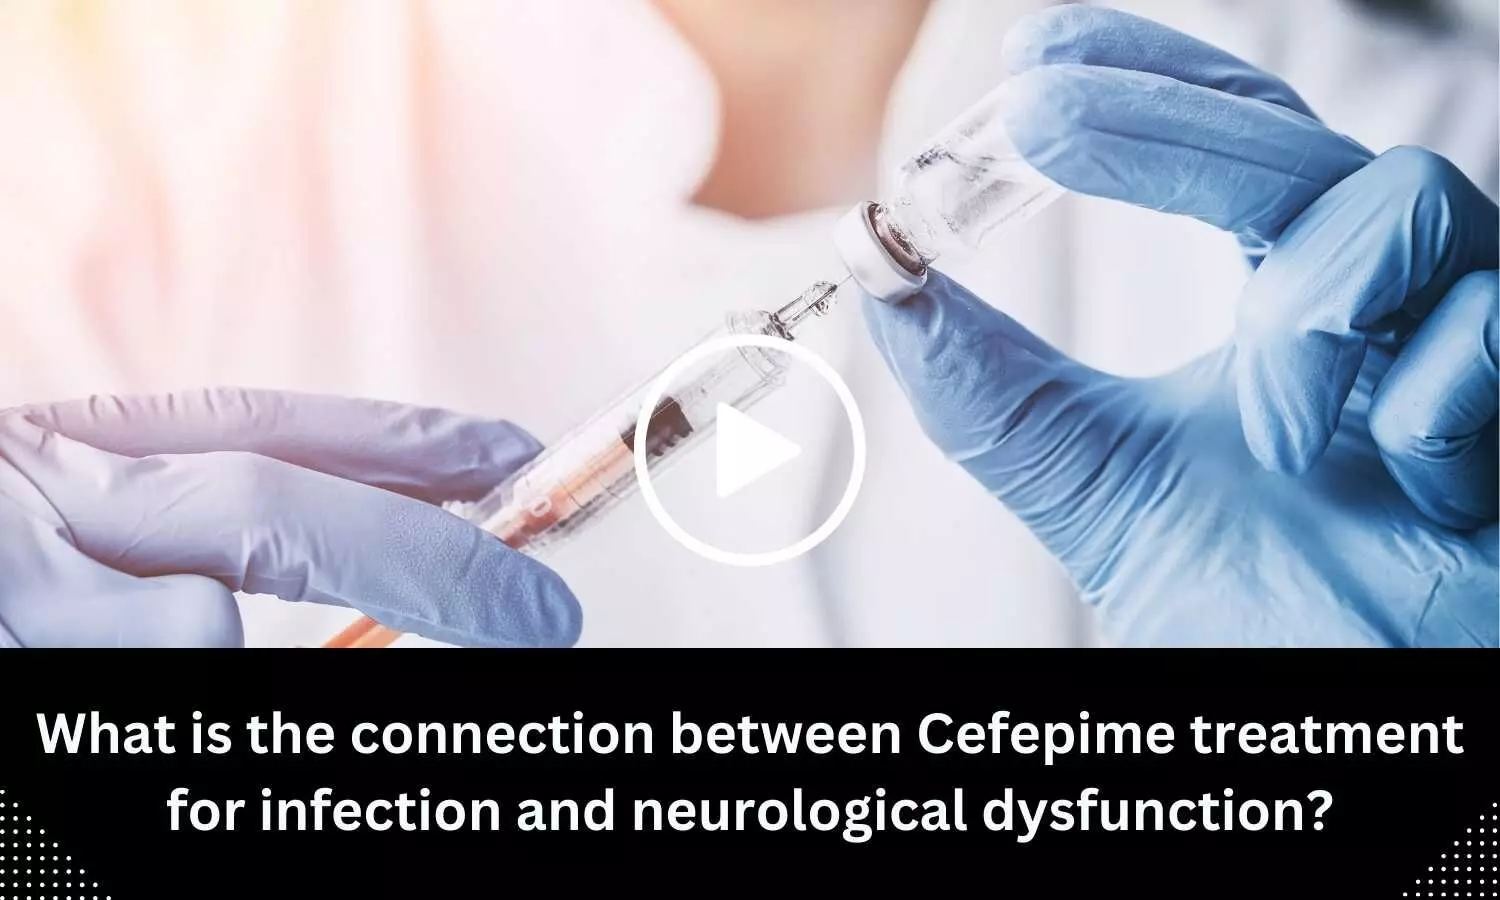 What is the connection between Cefepime treatment for infection and neurological dysfunction?